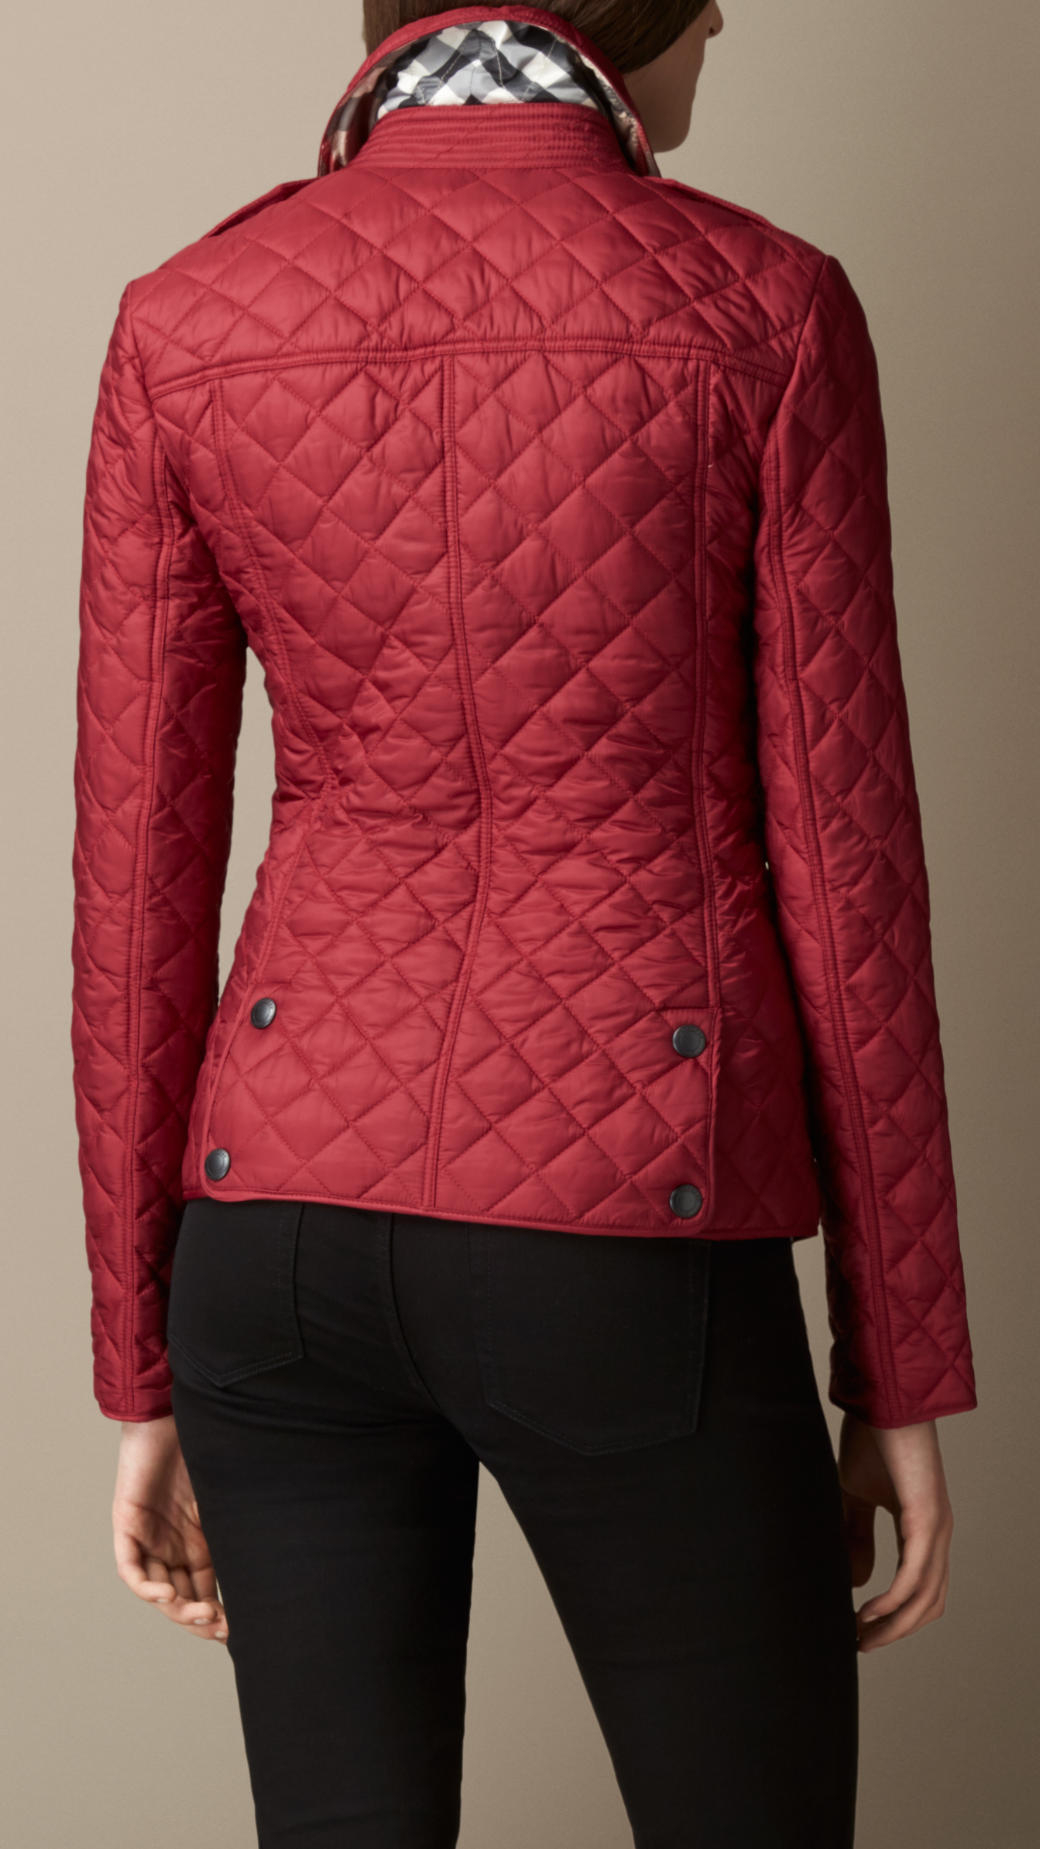 Burberry Diamond Quilted Jacket in Red (alizarin crimson) | Lyst